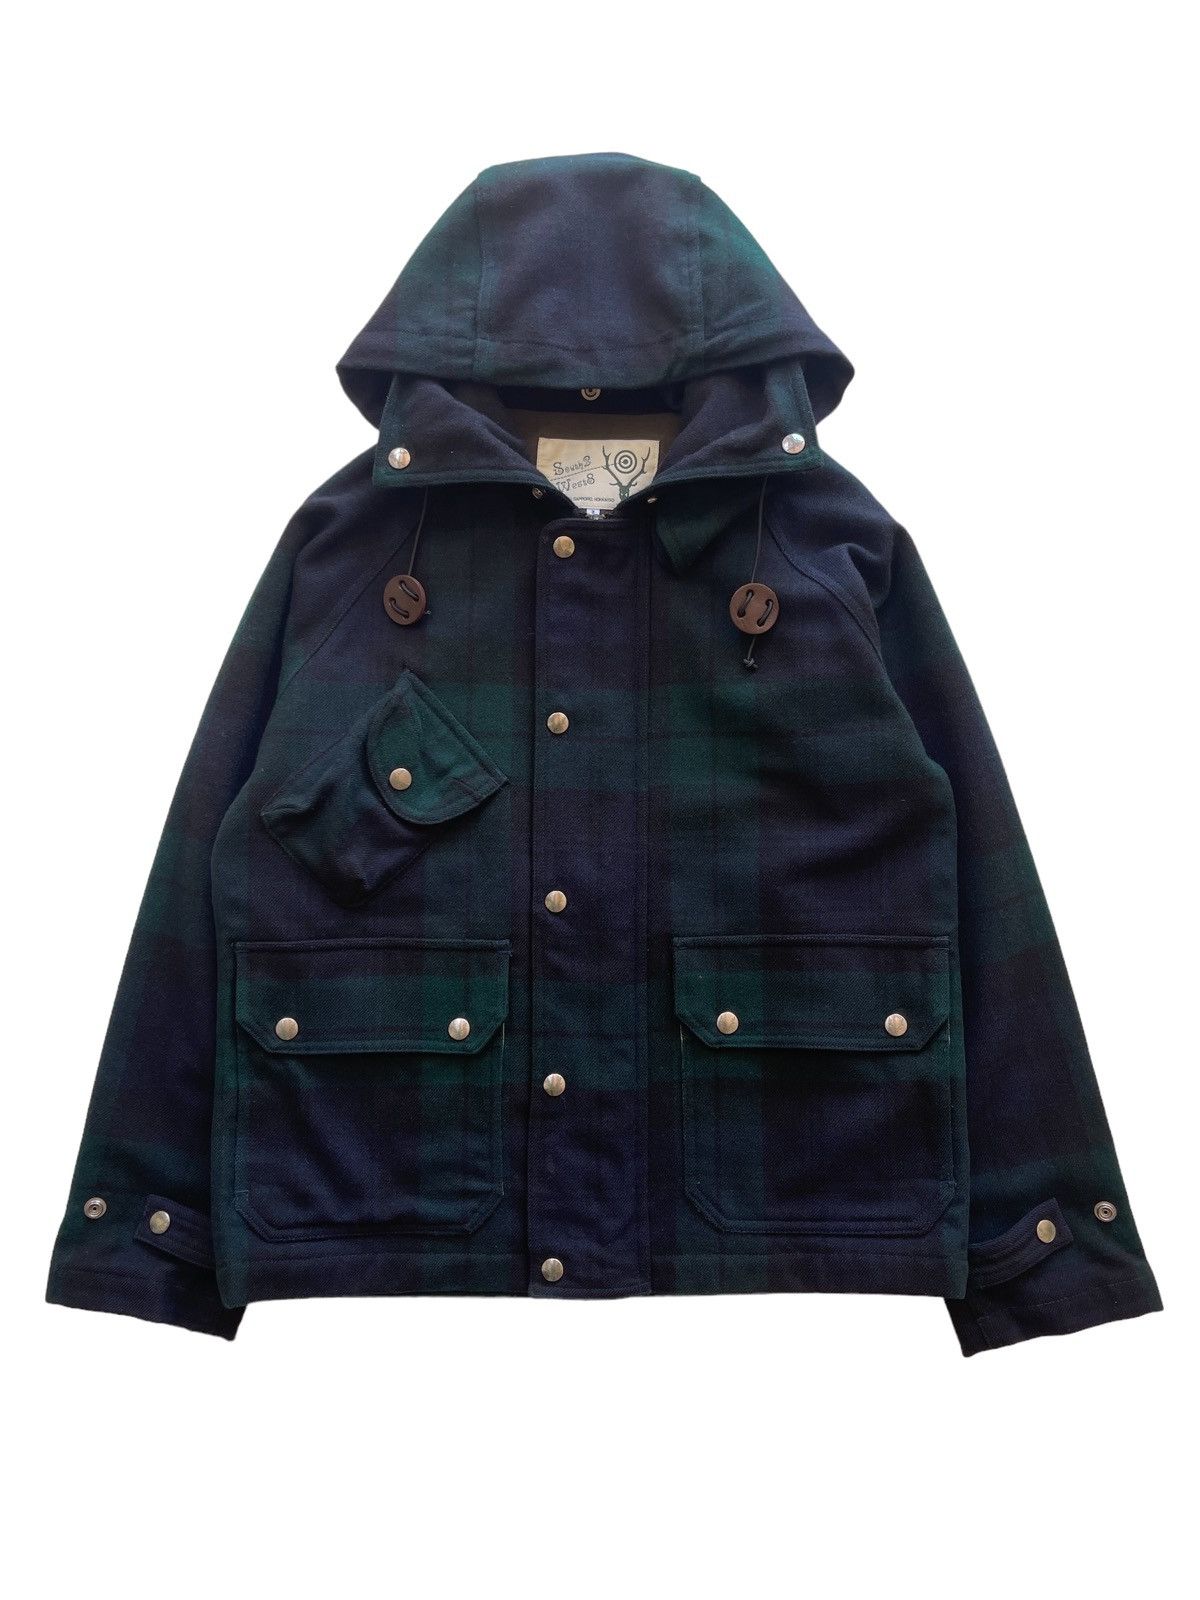 South2 West8 Nepenthes X south2 West8 Wool Tartan Carmel Jacket 